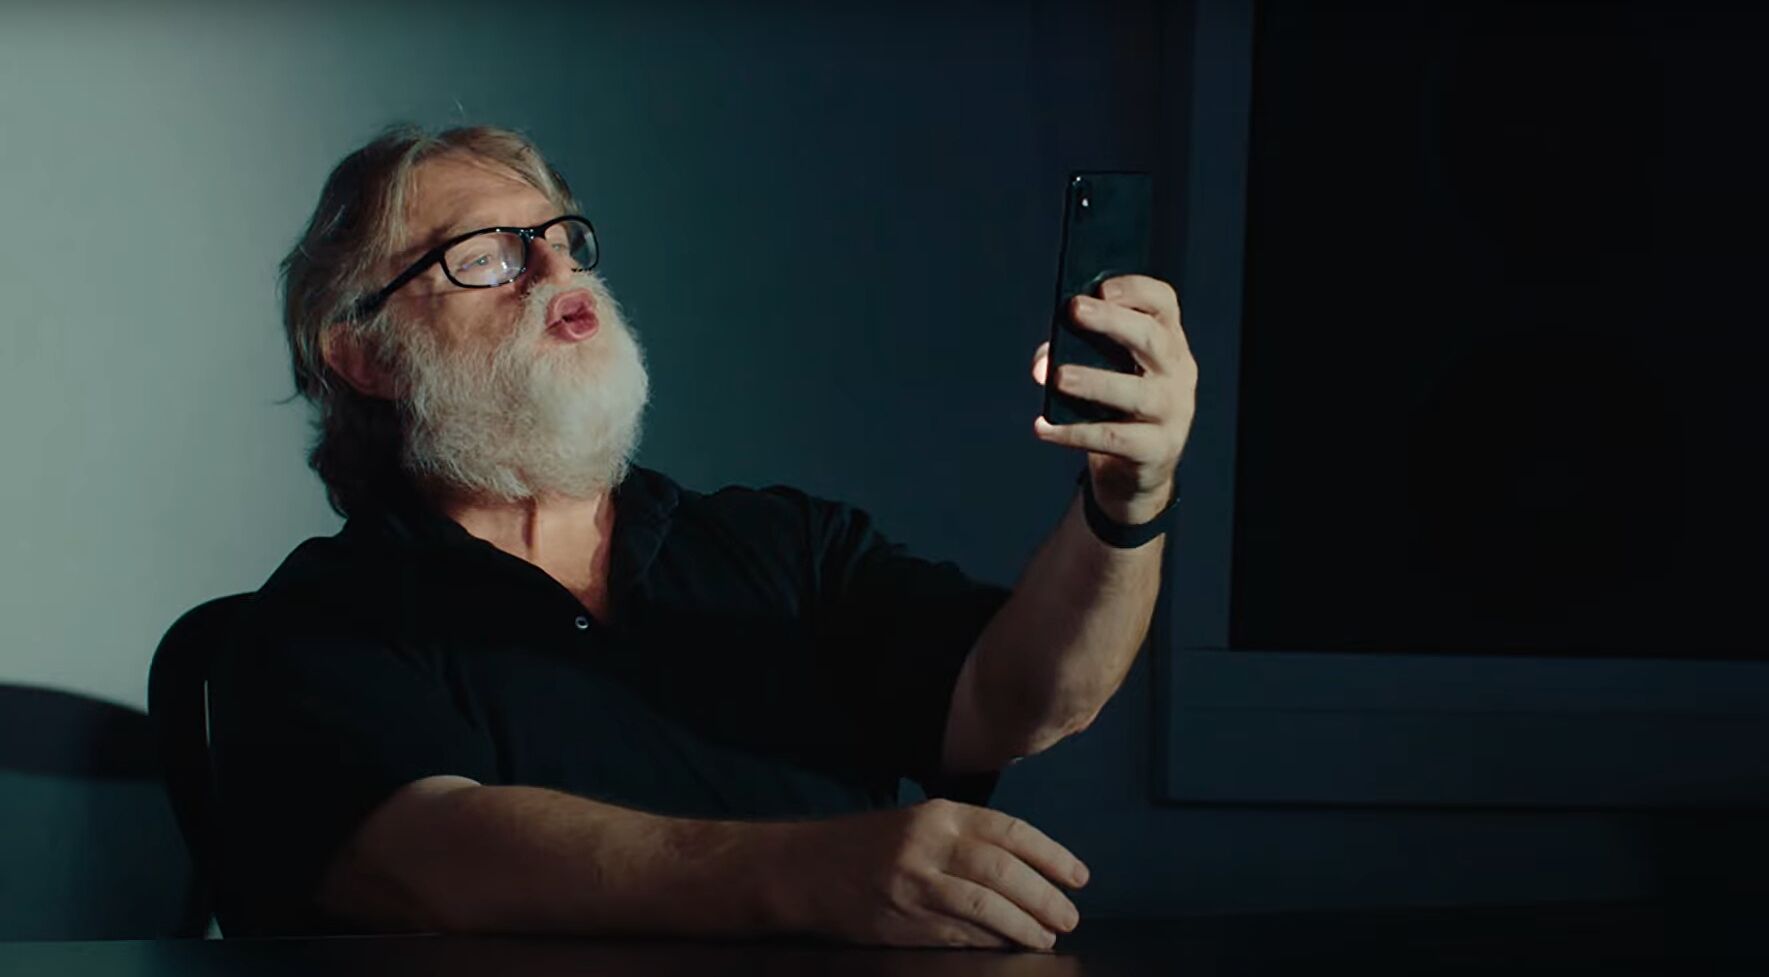 This Dota 2 announcer pack trailer starring Gabe Newell is wild